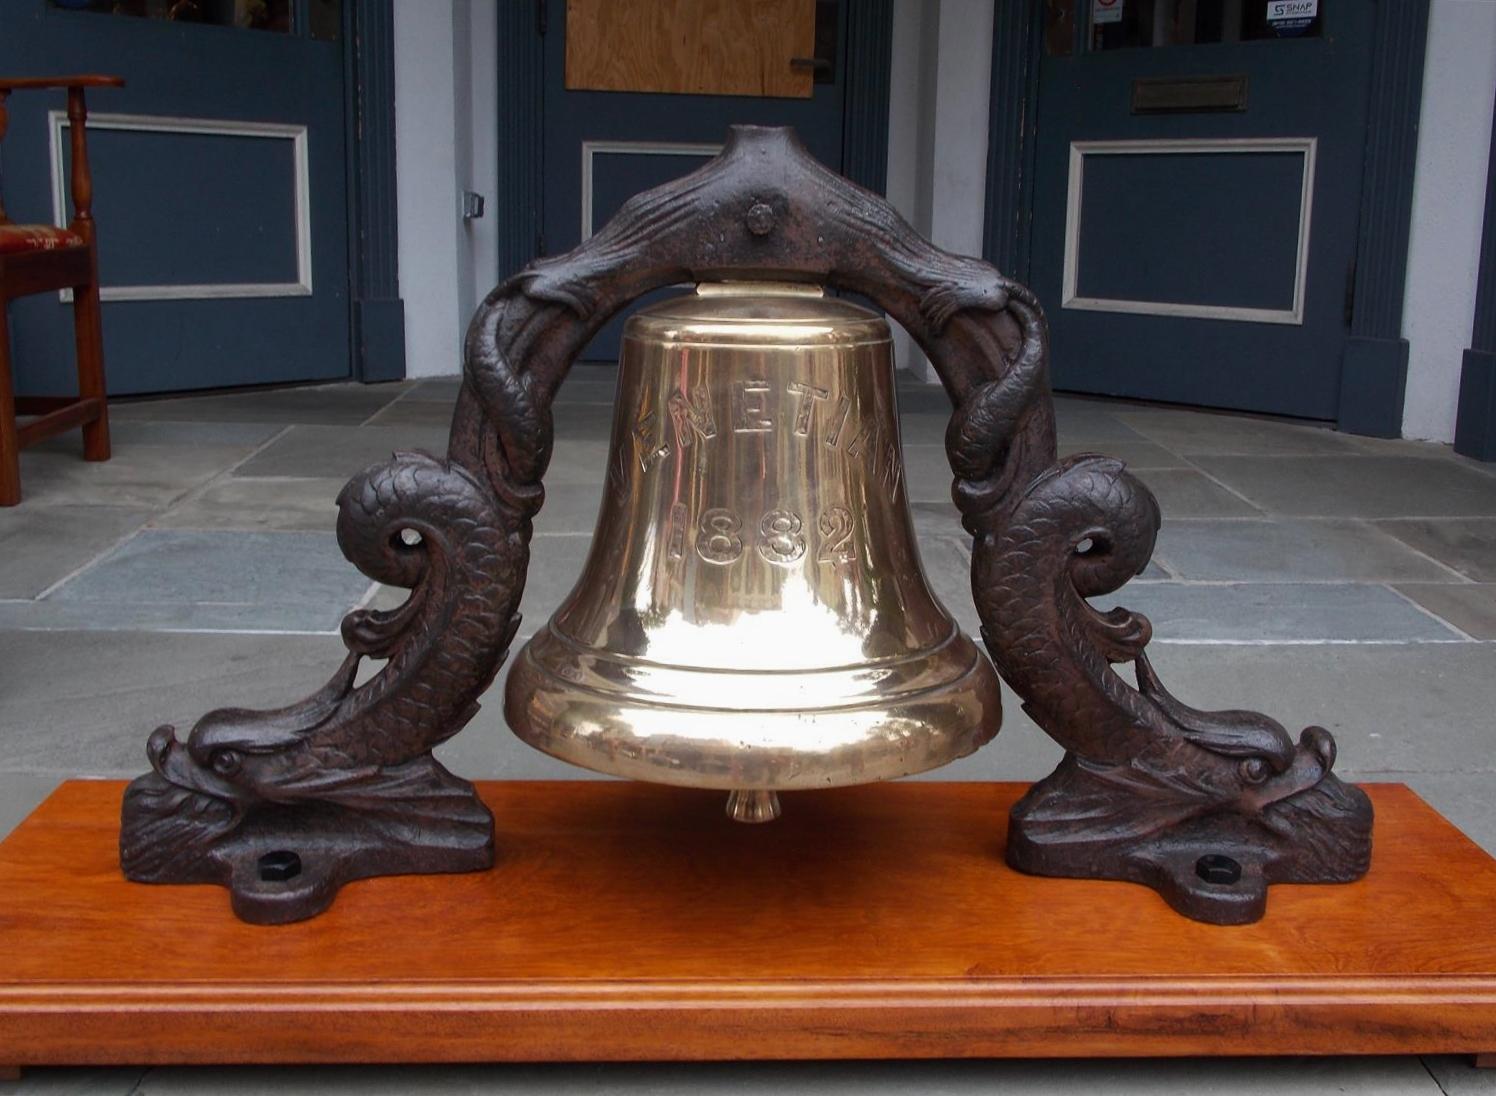 English solid brass ship’s bell from the “S.S. Venetian”. The engraved bell is mounted to the original mythical intertwined dolphin cast iron yoke and is attached to a rectangular carved molded edge Moca wood base for display. Moca wood is